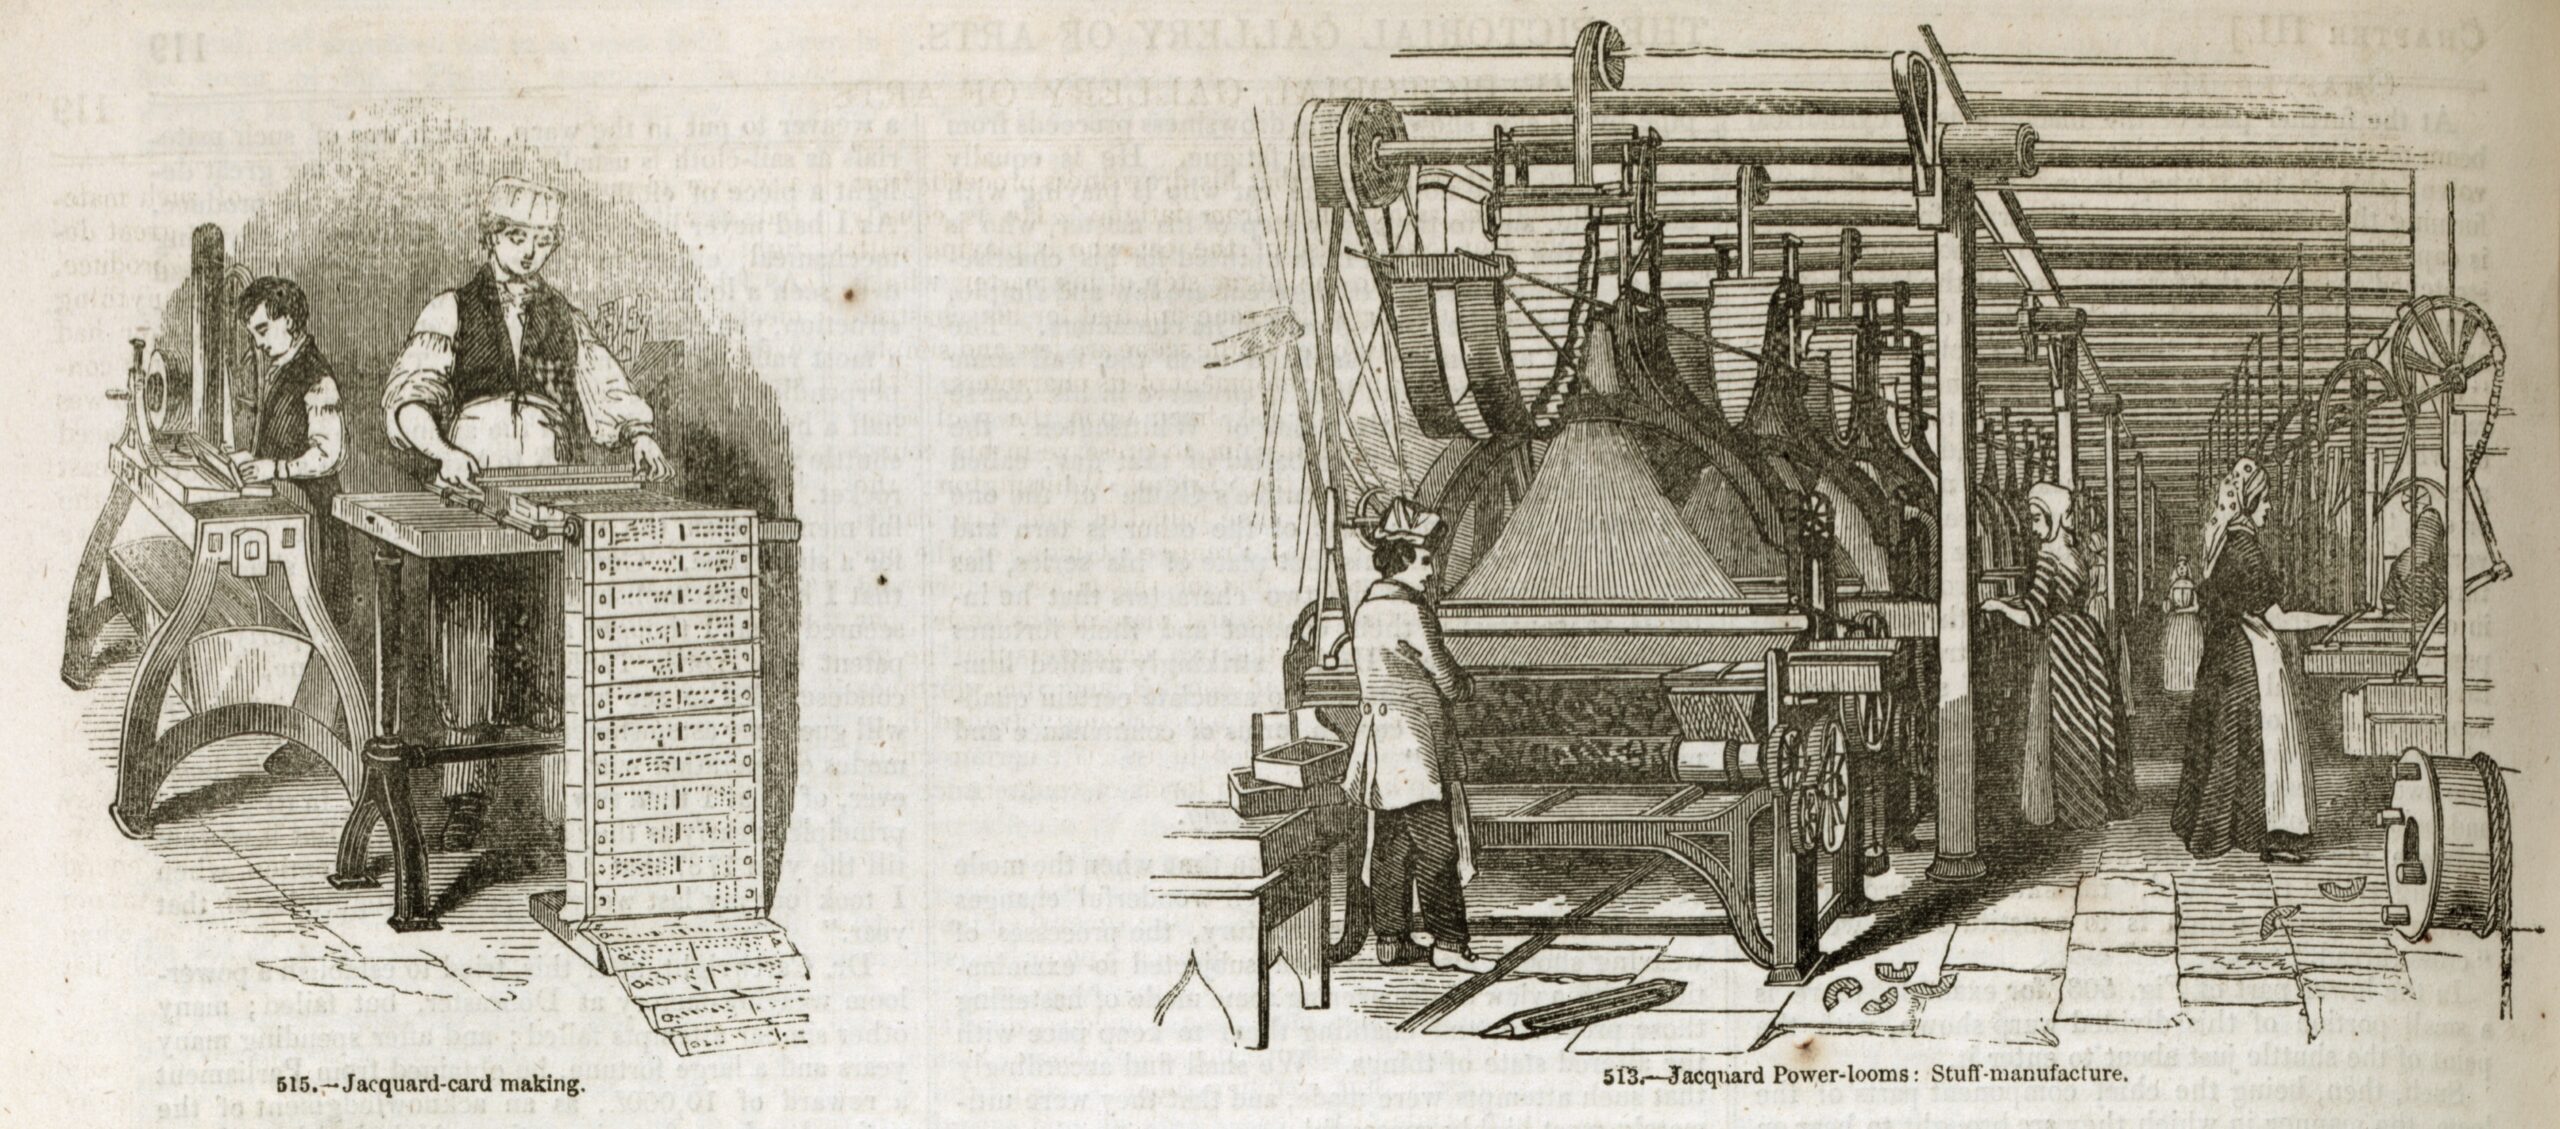 A 19th-century engraving illustrates the punch-card weaving process